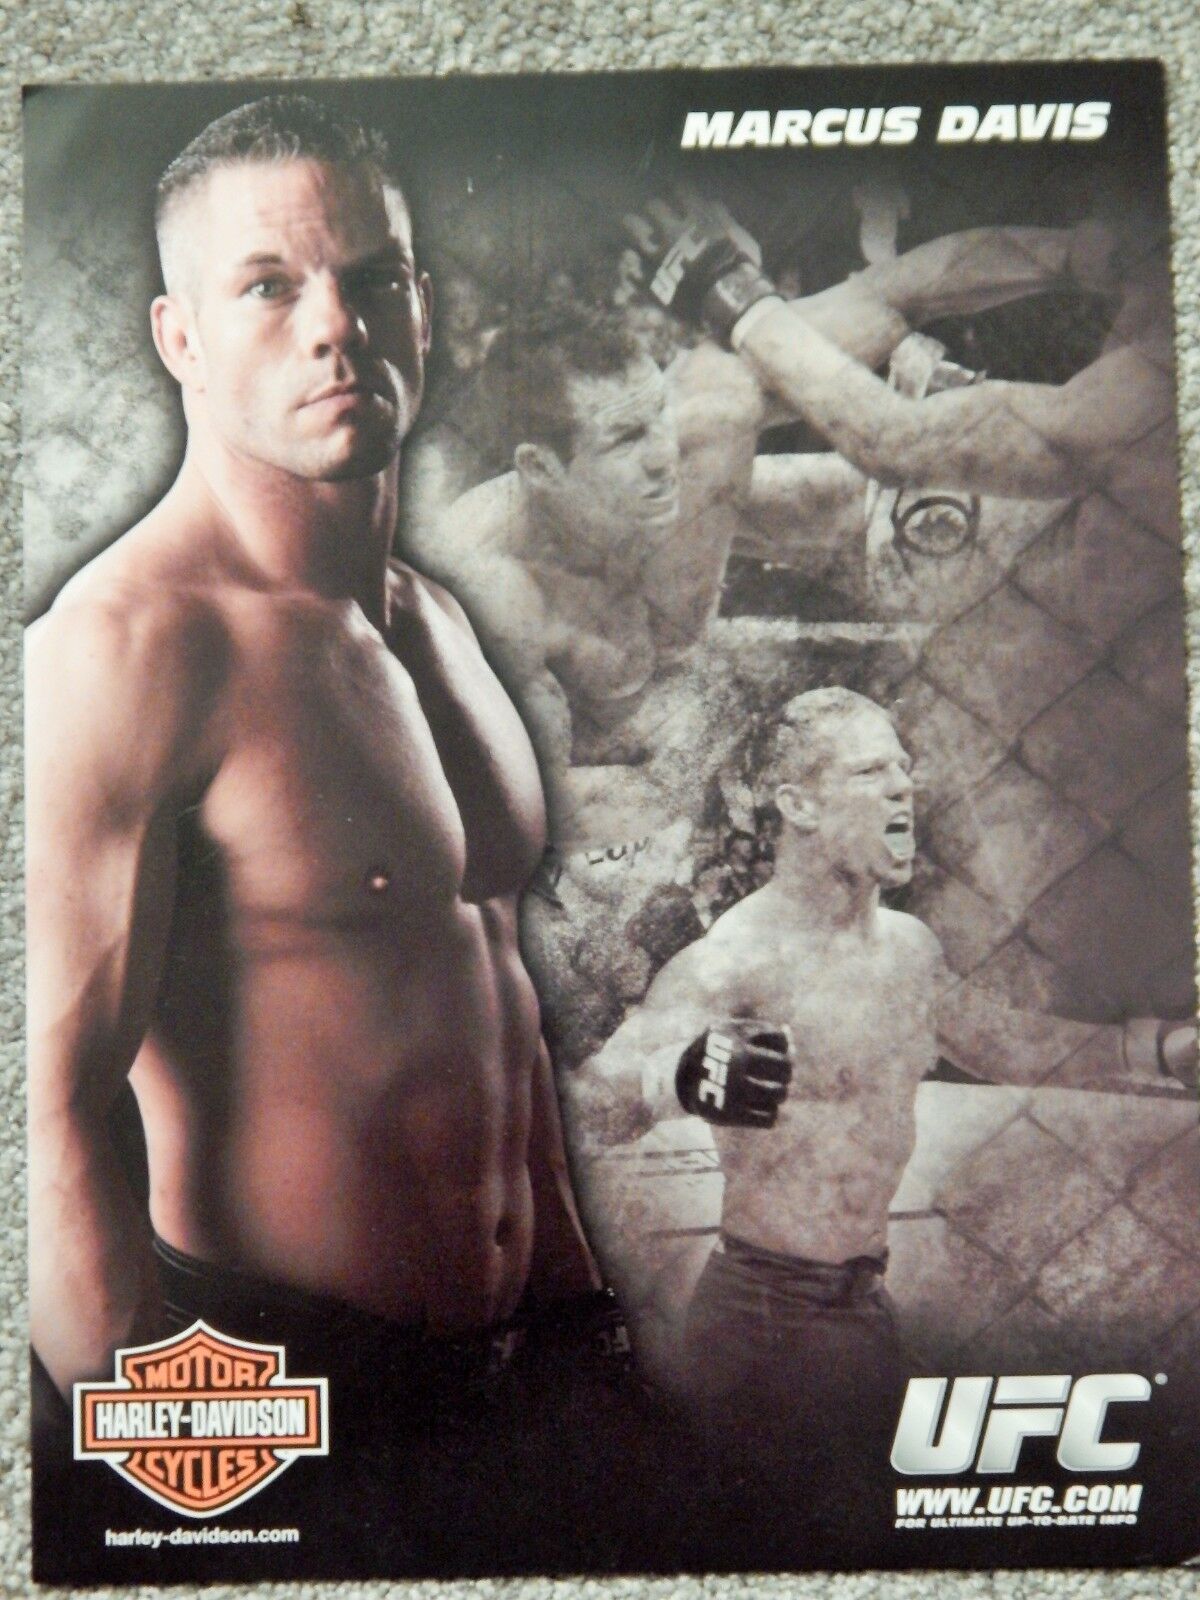 UFC MARCUS DAVIS DELUXE 8 1/2 X11 OFFICIAL Photo Poster painting COLLECTIBLE